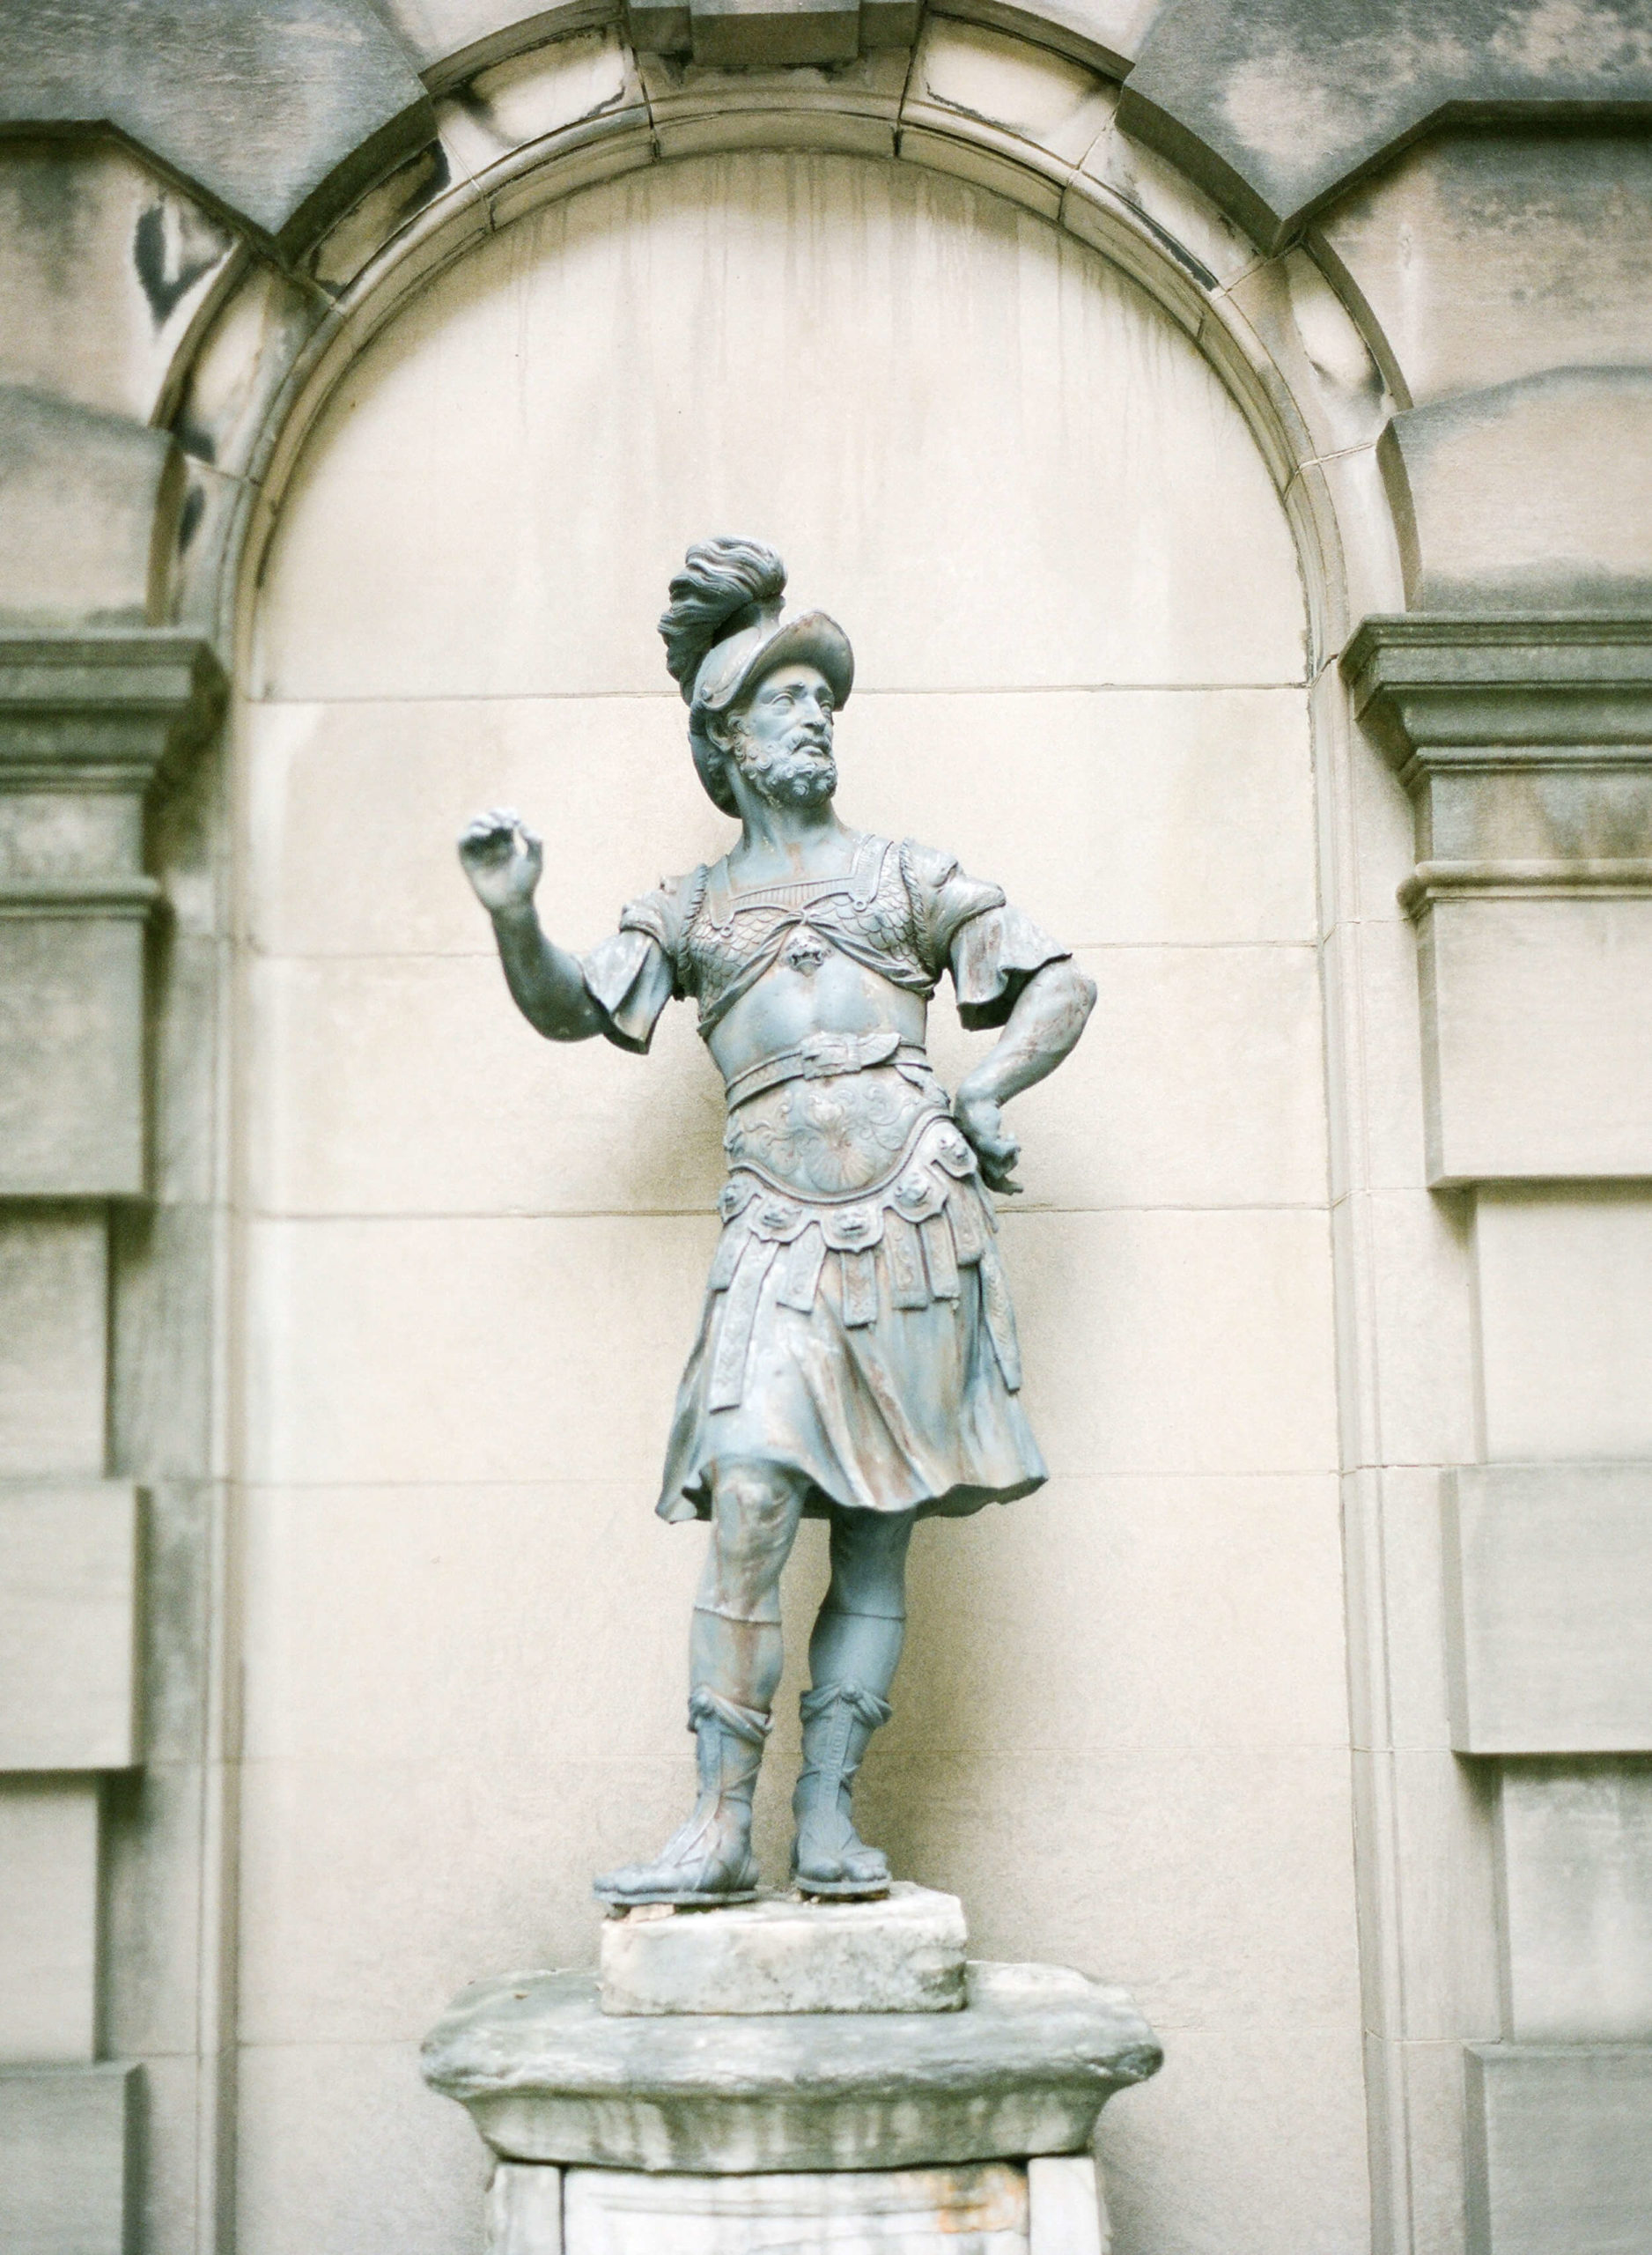 statue at Anderson House in Washington, D.C.